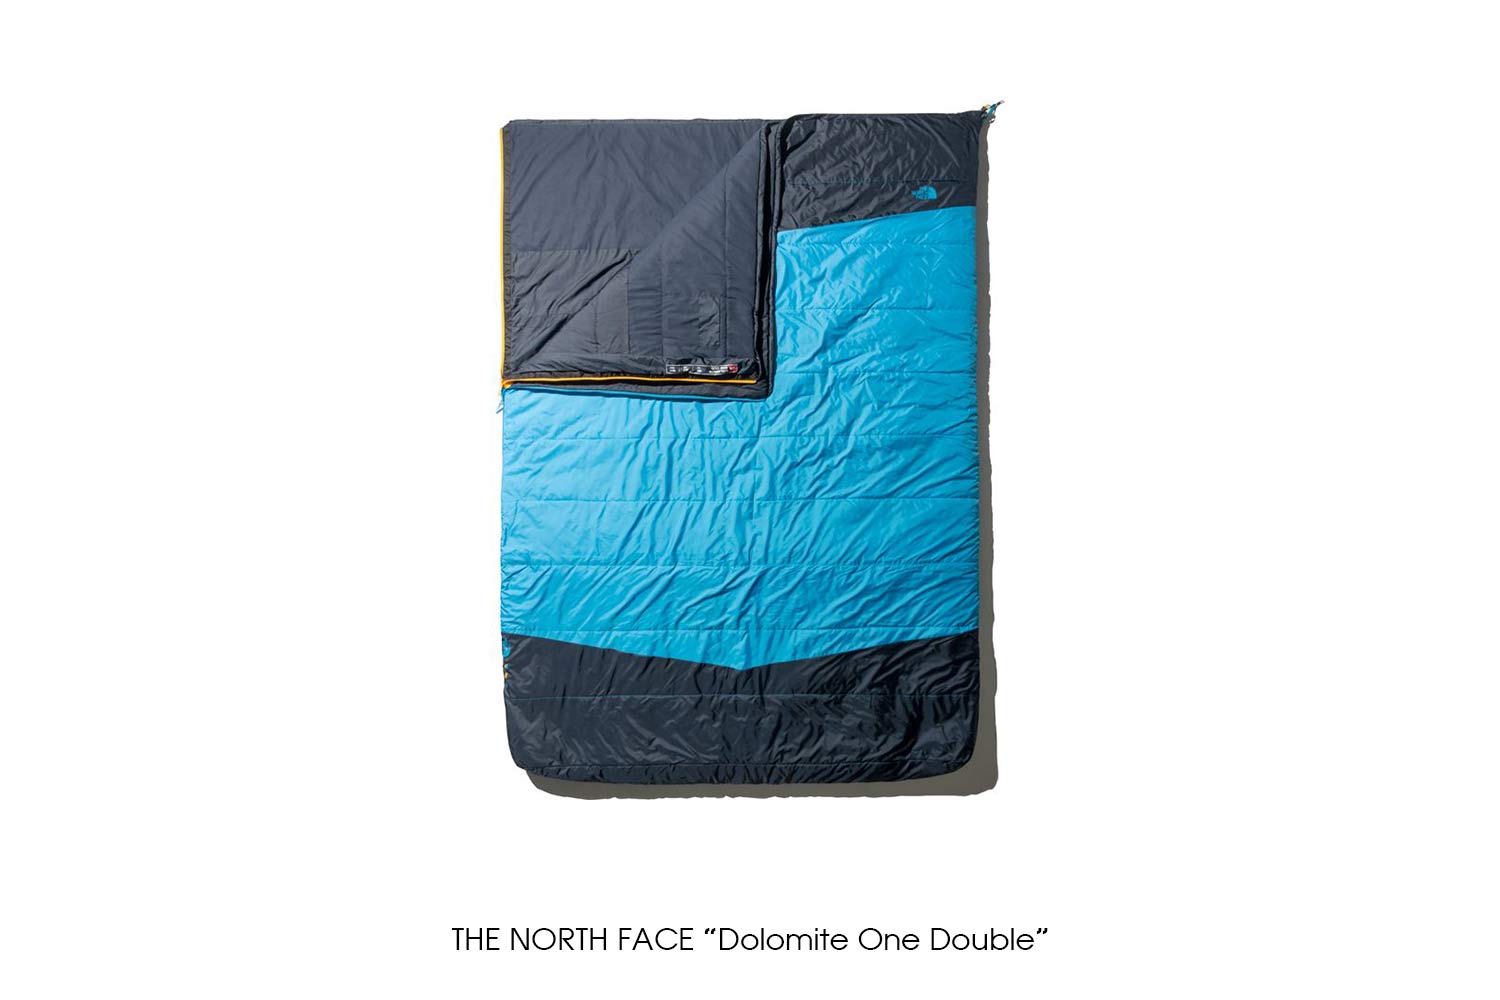 THE NORTH FACE "Dolomite One Double"